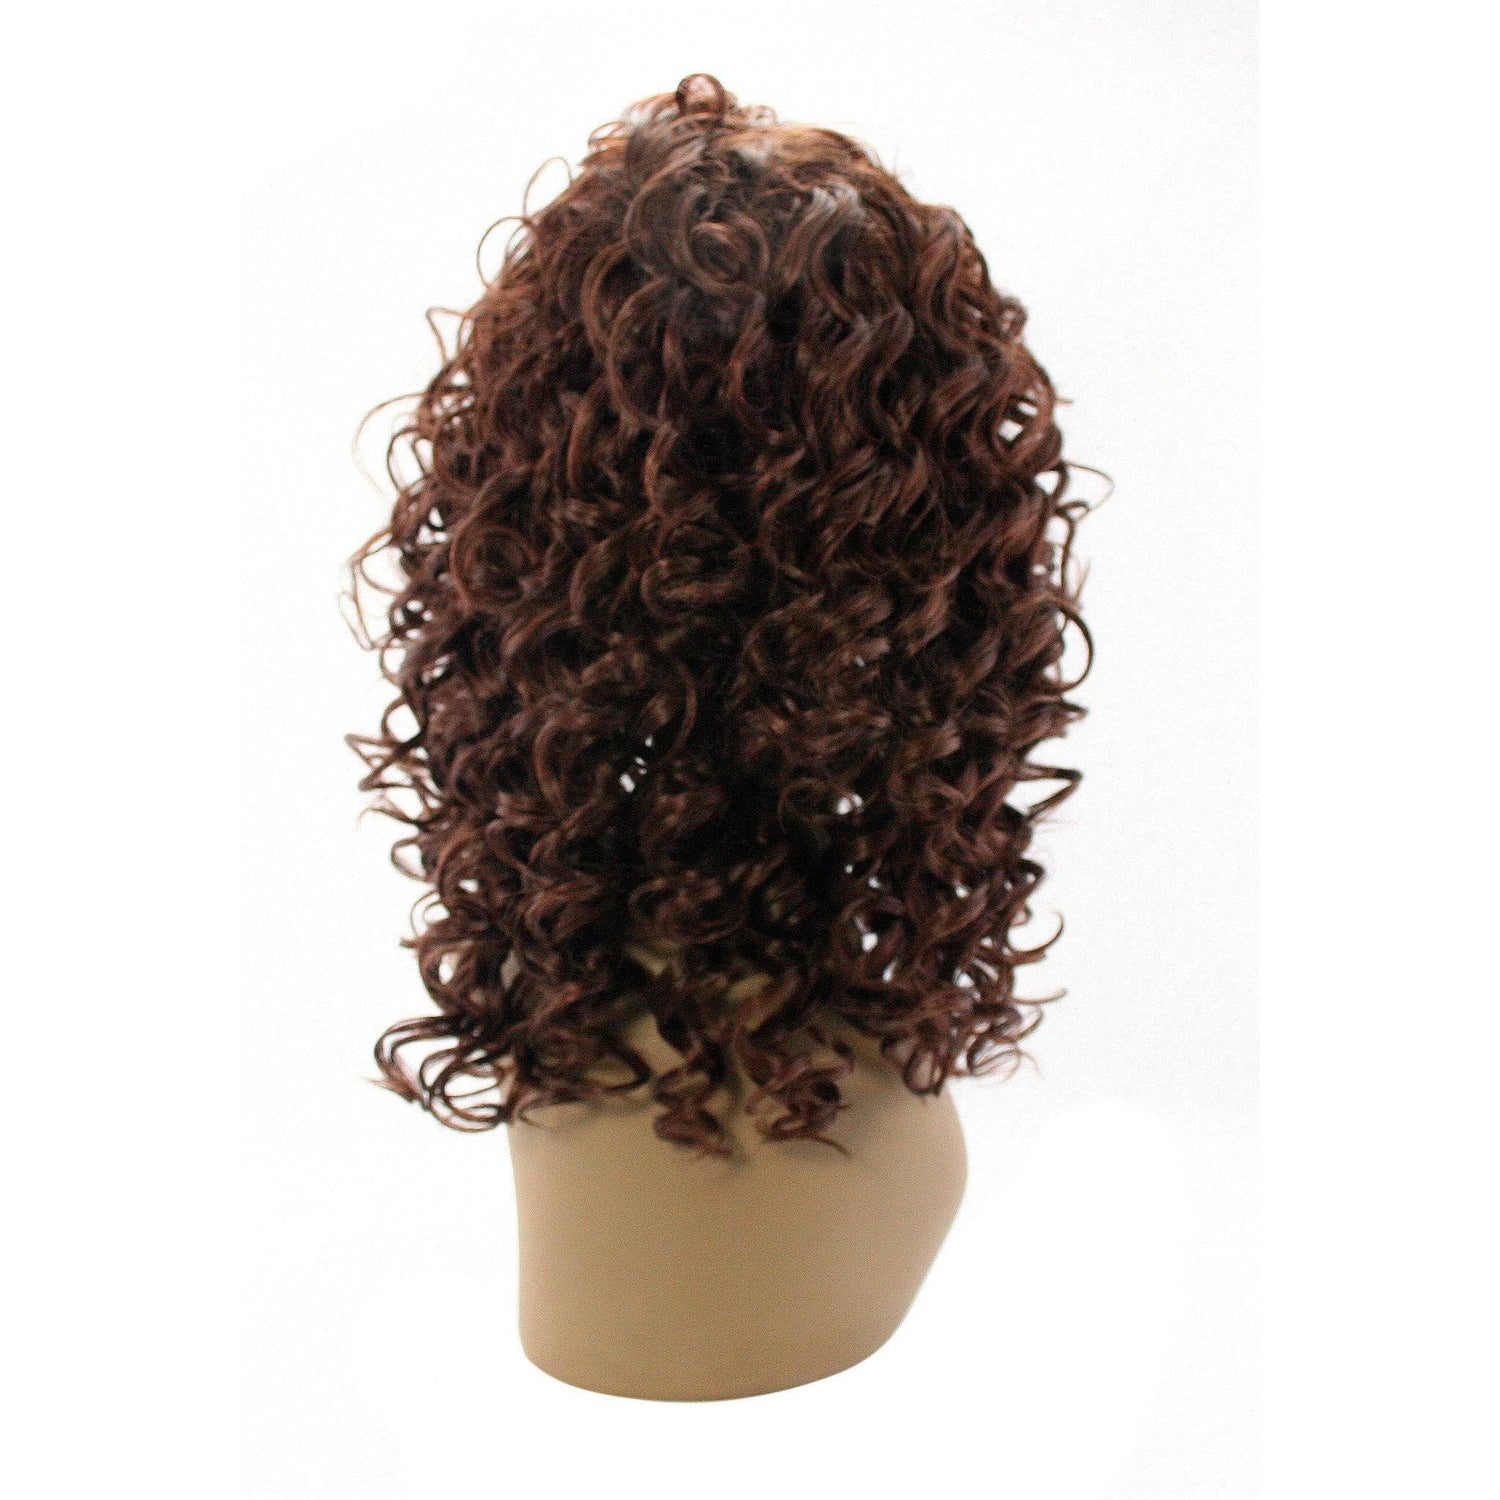 Unique's 100% Human Hair Full Wig / Style "A" - VIP Extensions